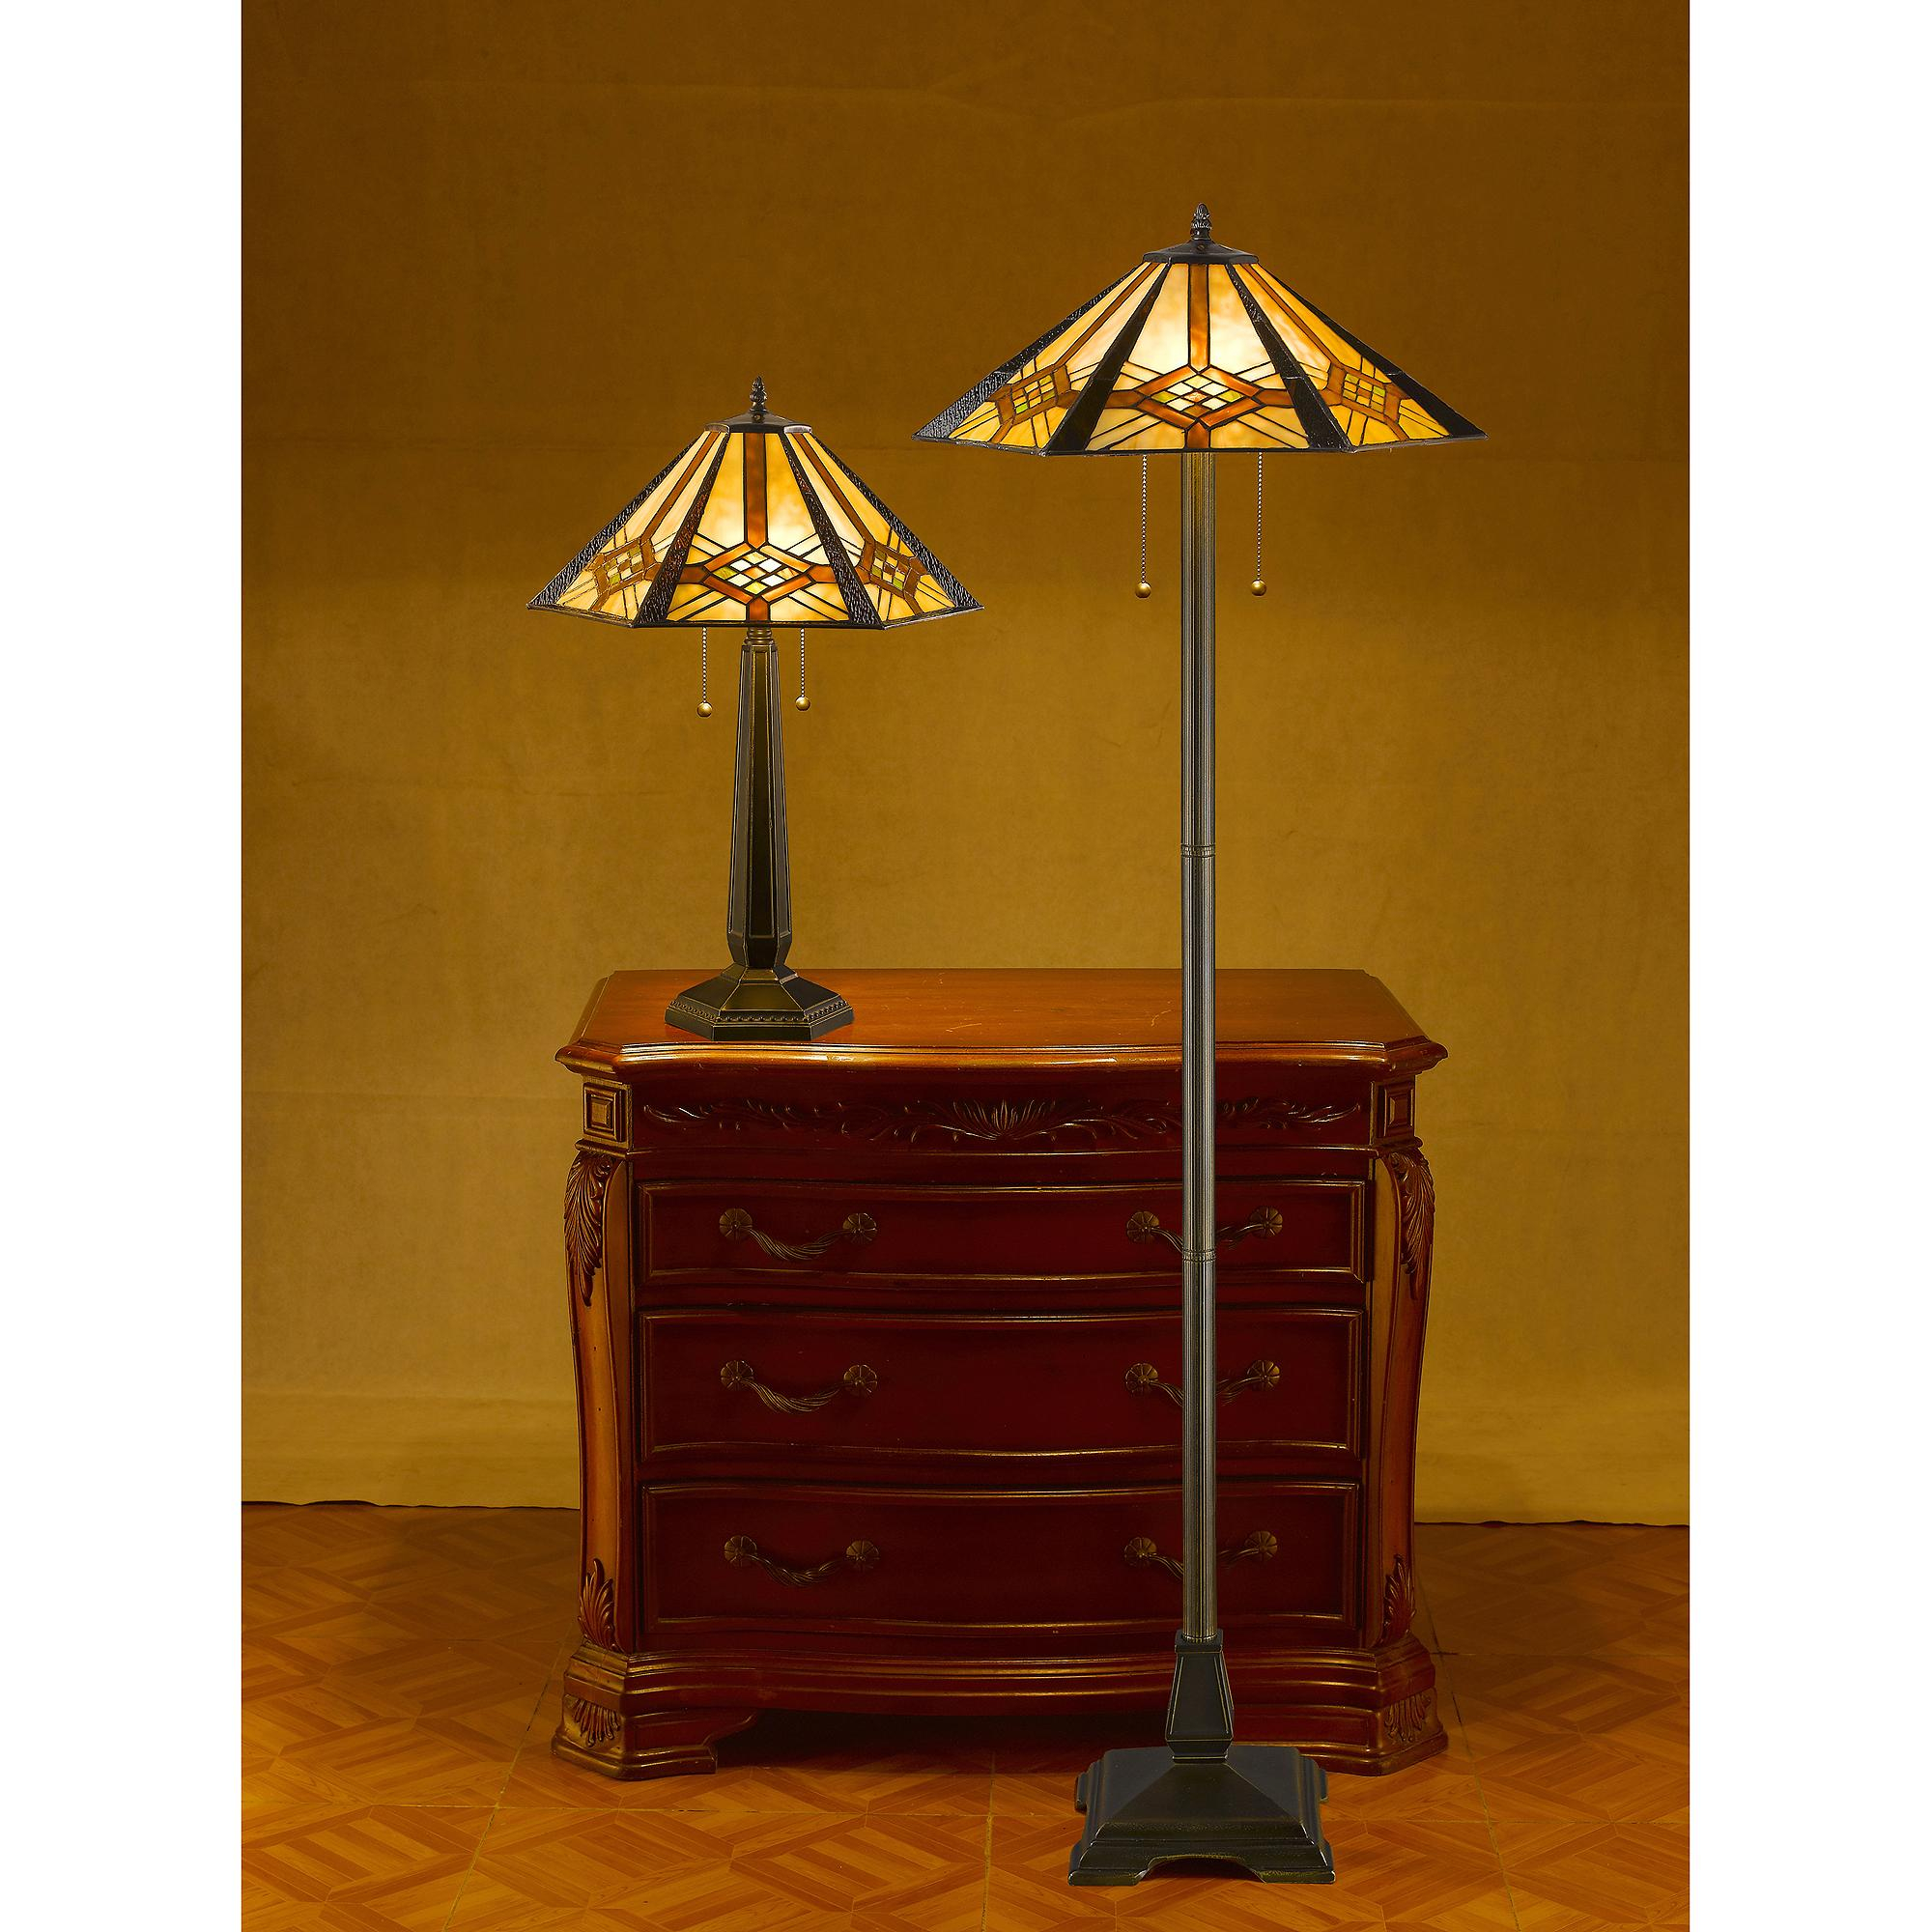 Mission Style Floor Lamps When Traditional Meets Antique in dimensions 2000 X 2000